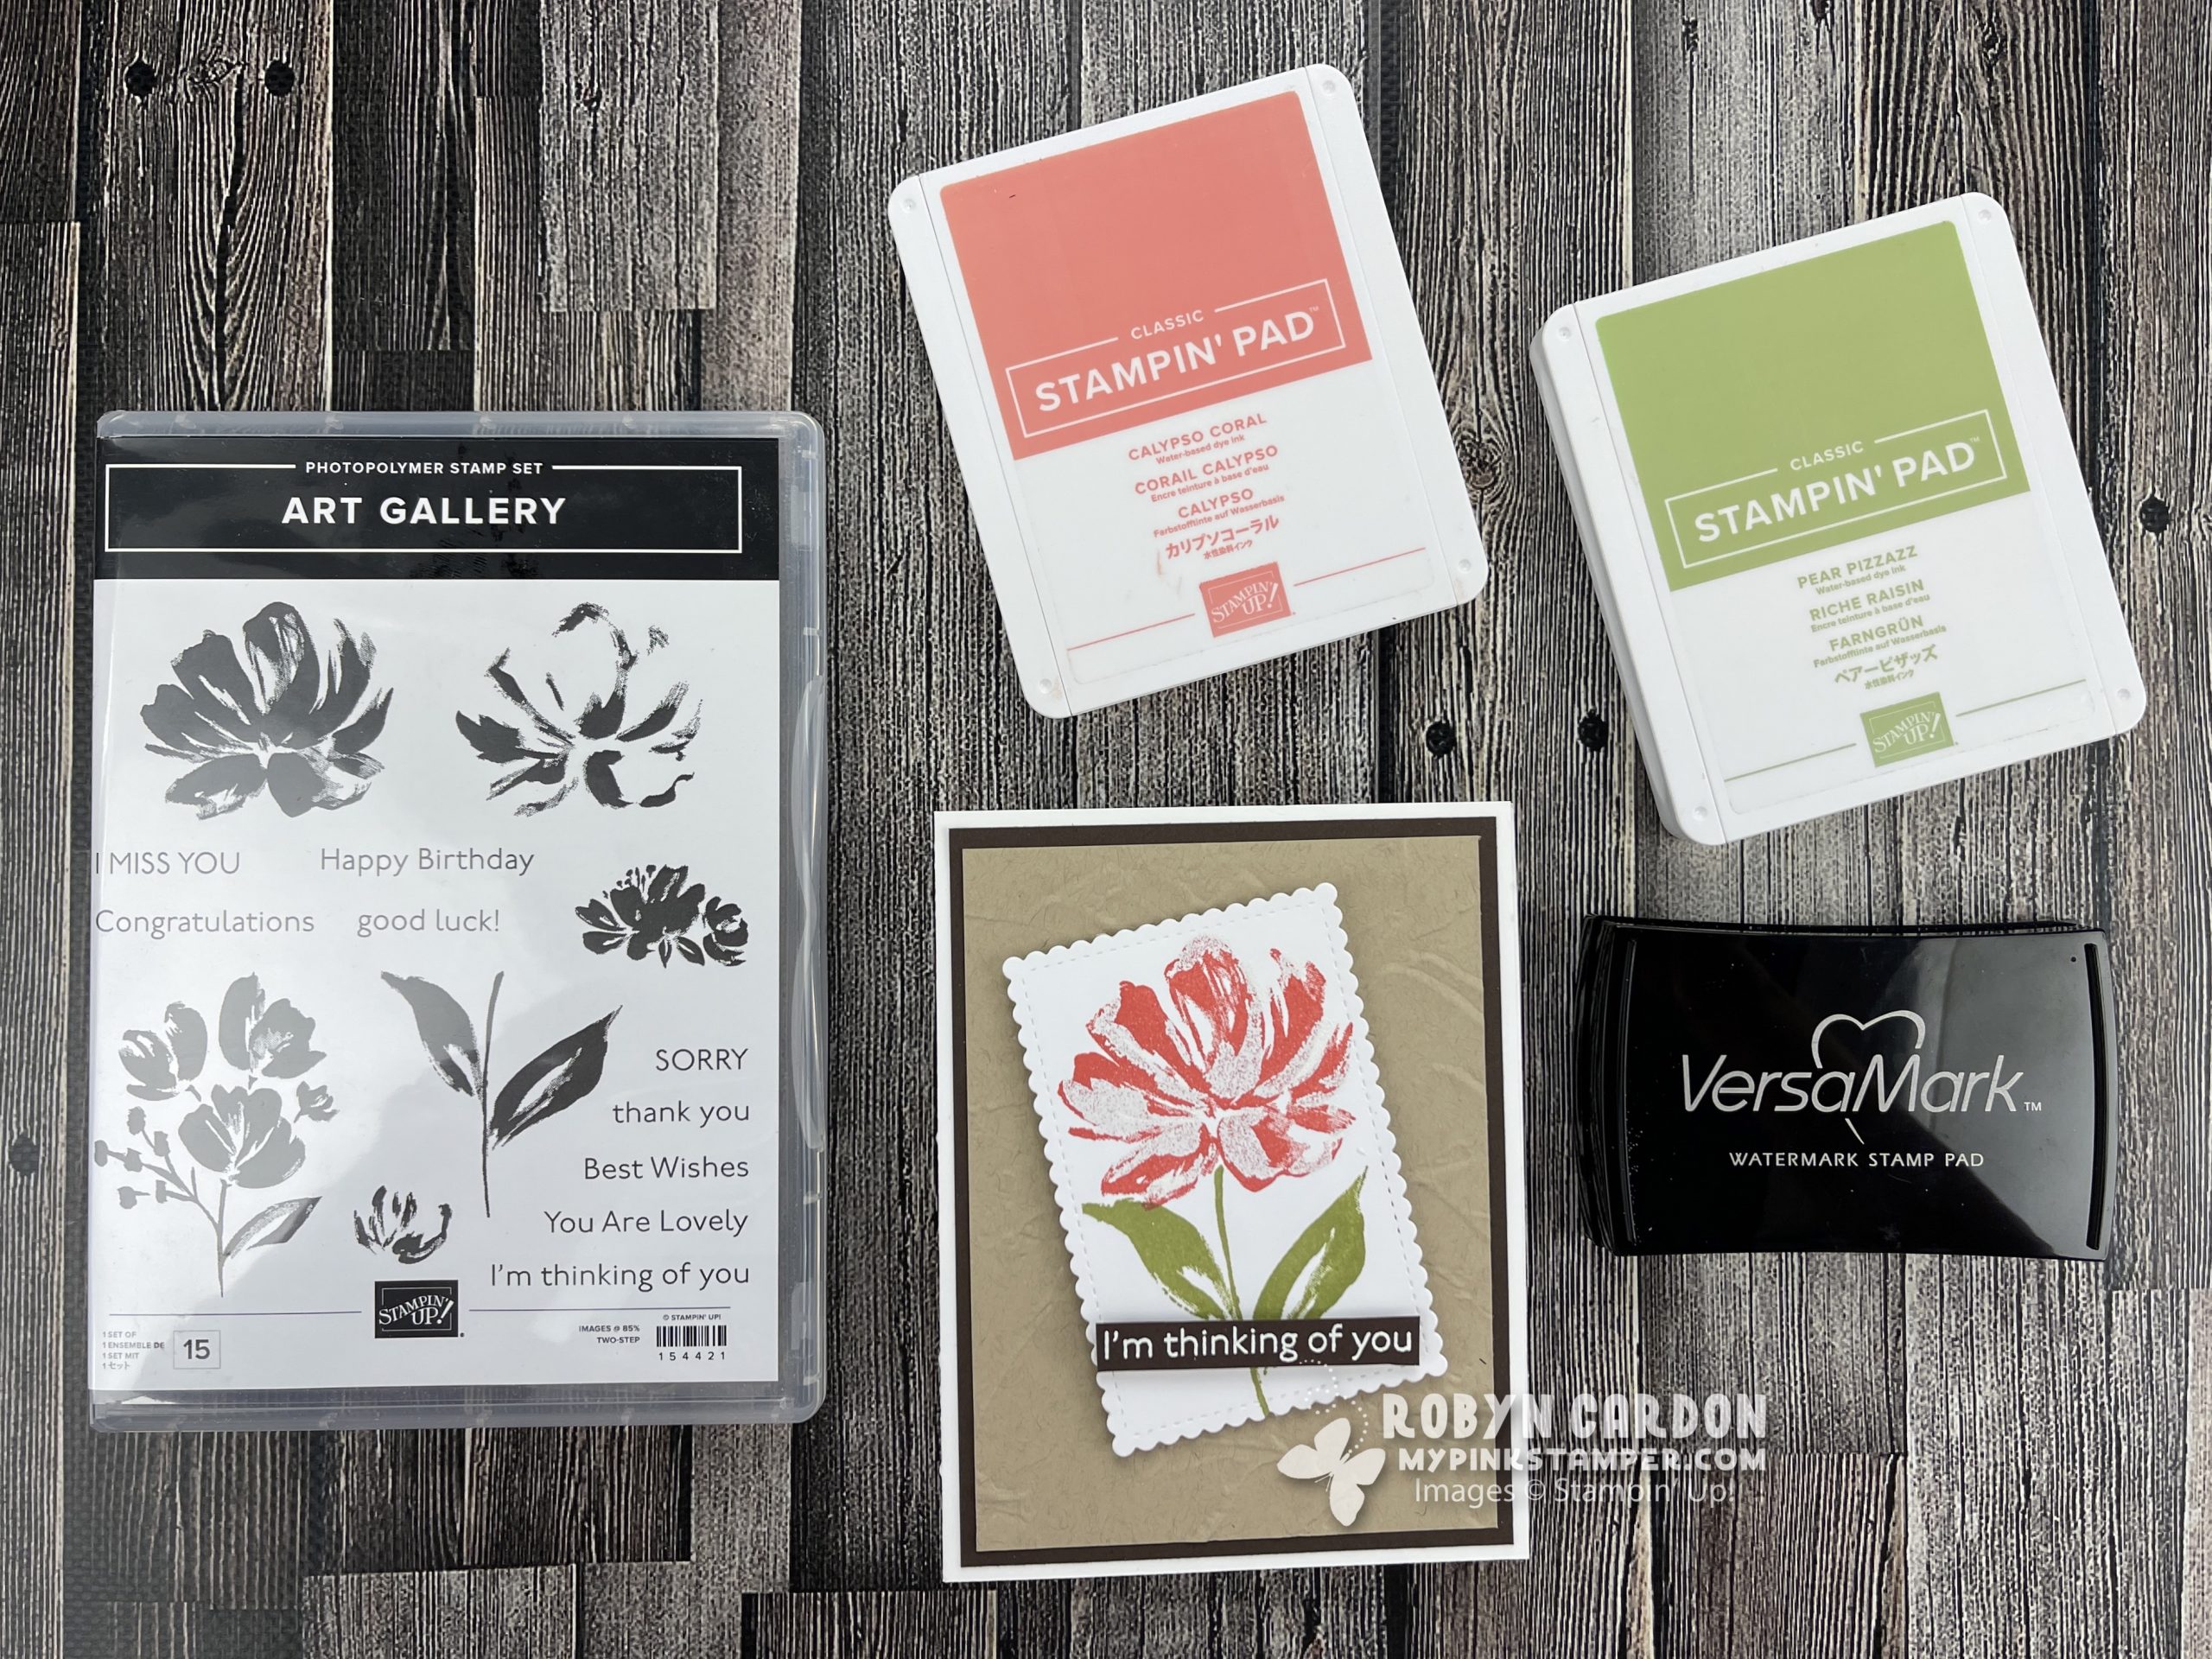 {VIDEO}Episode 836 Stampin’ Up! Art Gallery Embossed Card – Days 21 & 22 – Week 4 Promotion!